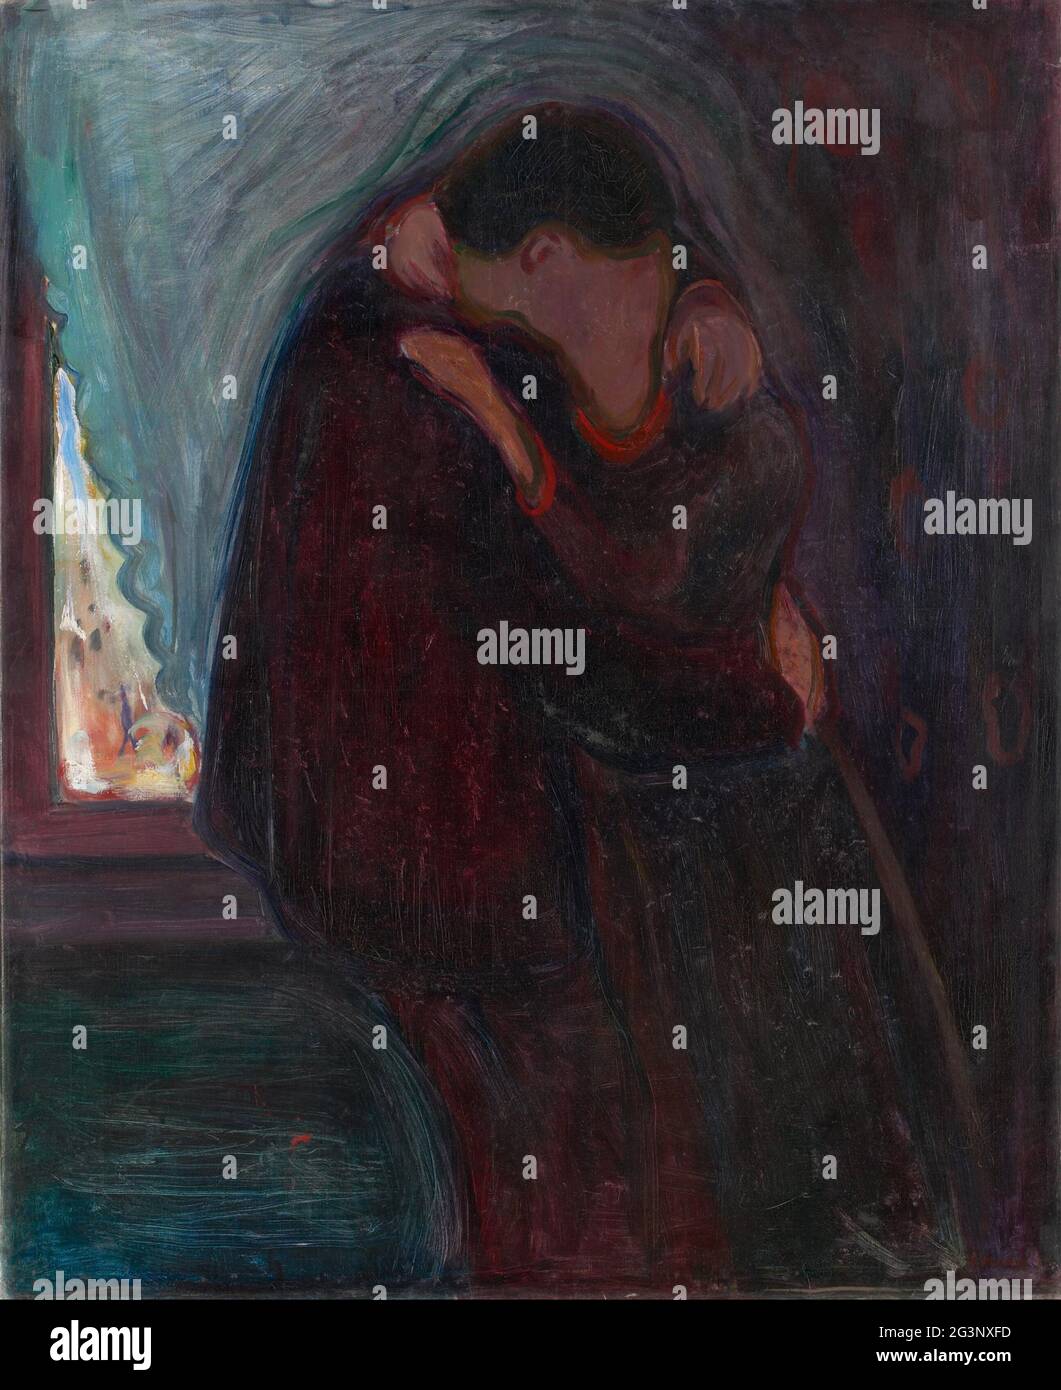 Title: The Kiss Creator:  Edvard Munch Date: 1897 Medium: oil on canvas Dimensions: 99x81 cms Location: Munch-museet, Oslo, Norway Stock Photo